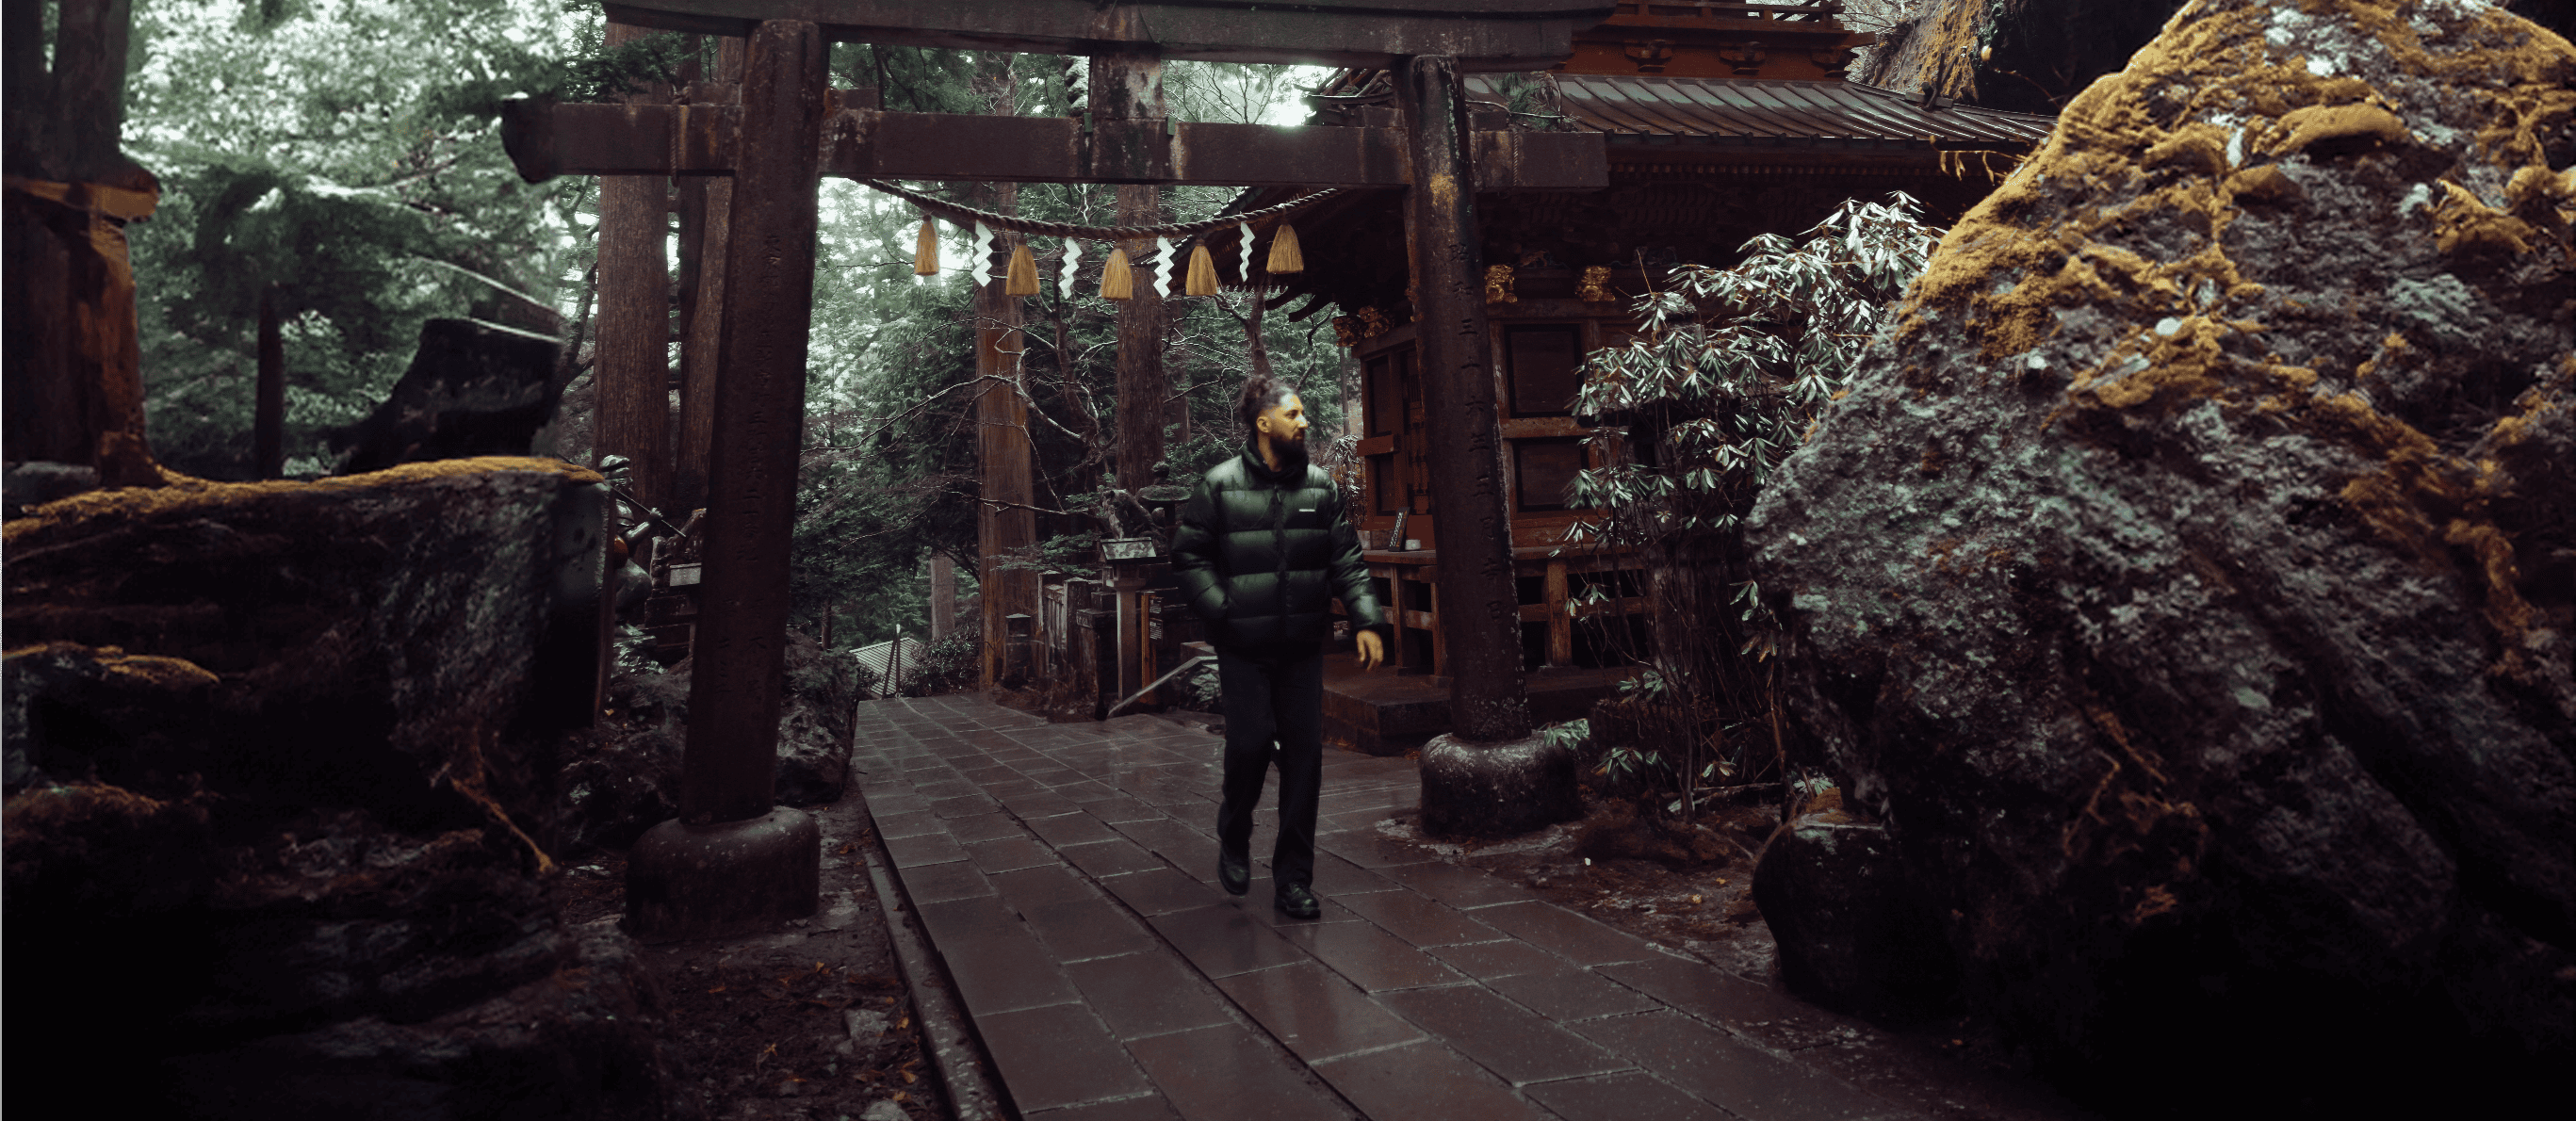 A man in a black jacket walks under the gate of a historic Japanese temple on an overcast day.